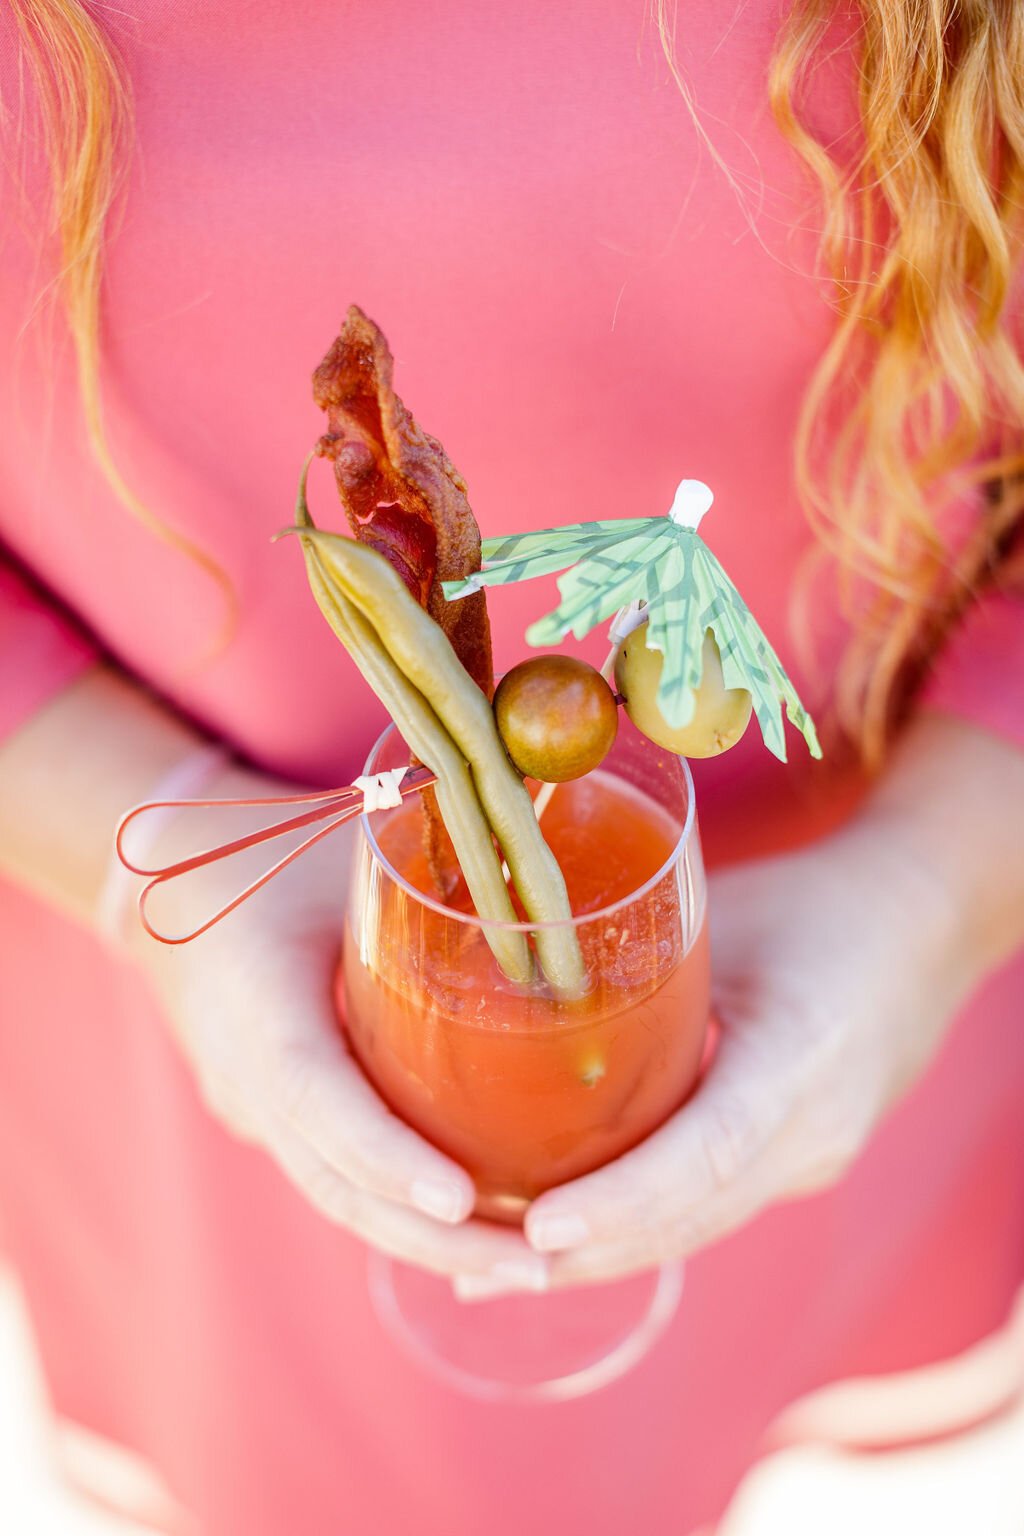 www.santabarbarawedding.com | Head &amp; Heart Photography | Ann Johnson Events | Hotel Californian | #BrandYou2020 | Bloody Mary with Bacon, Olives, Green Beans, and A Drink Umbrella